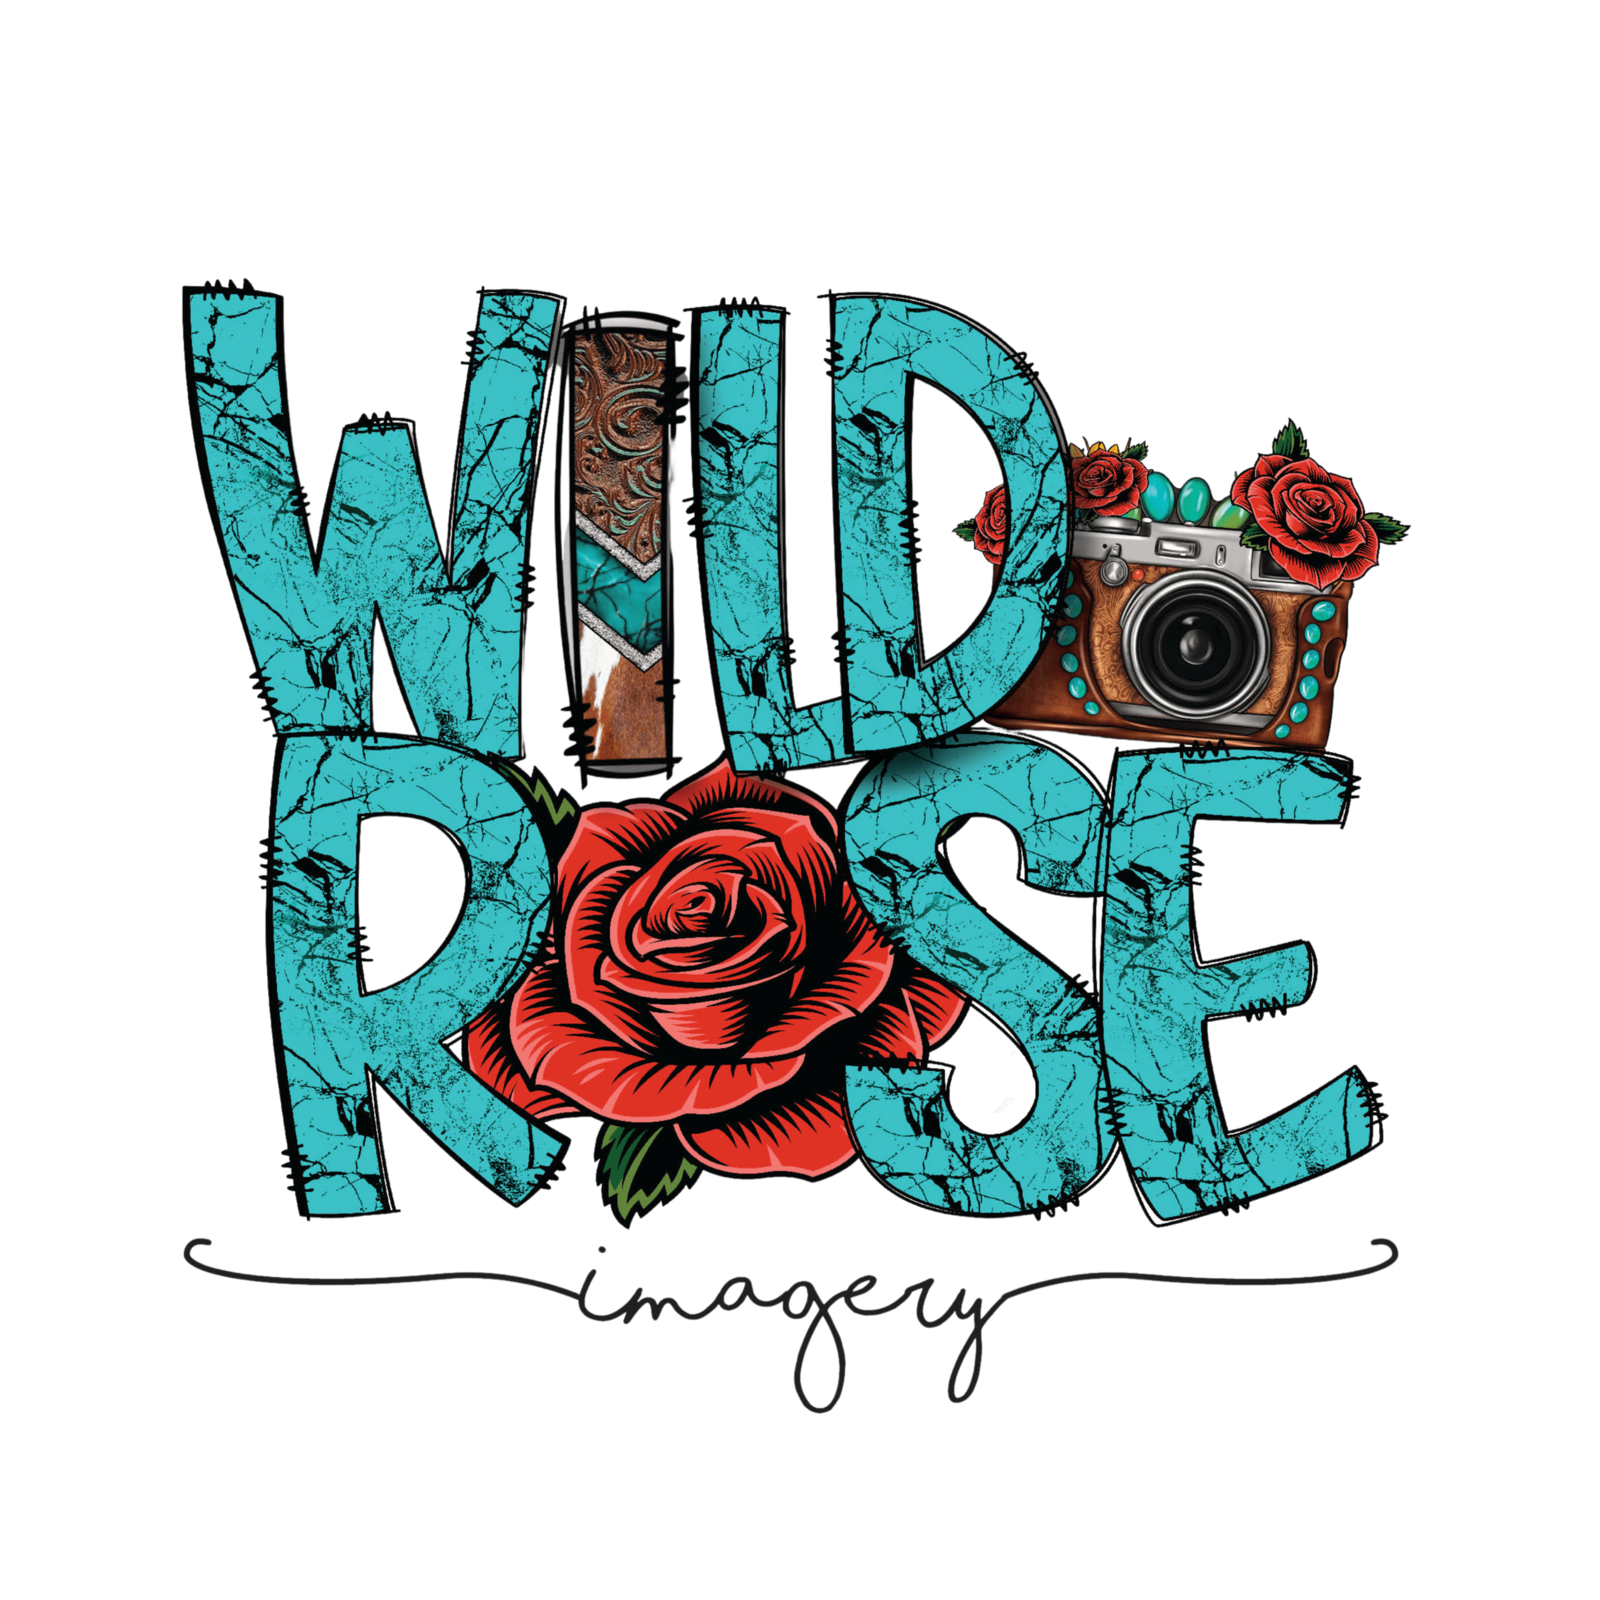 Wild Rose Imagery